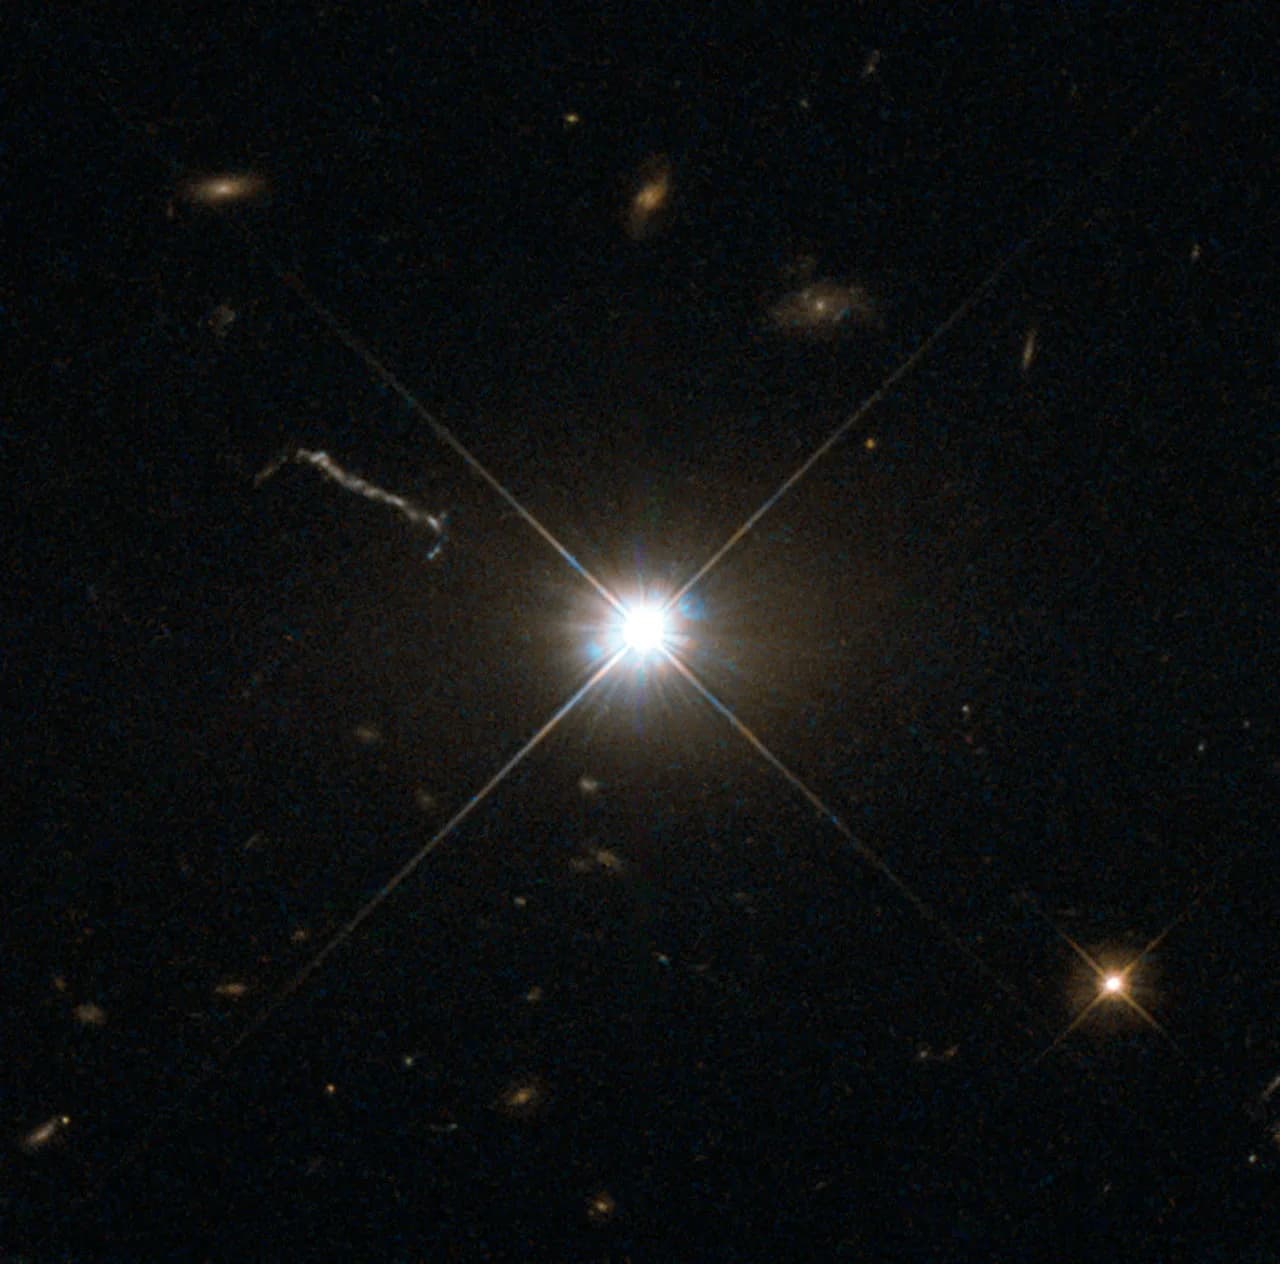 3C 273 imaged by Hubble